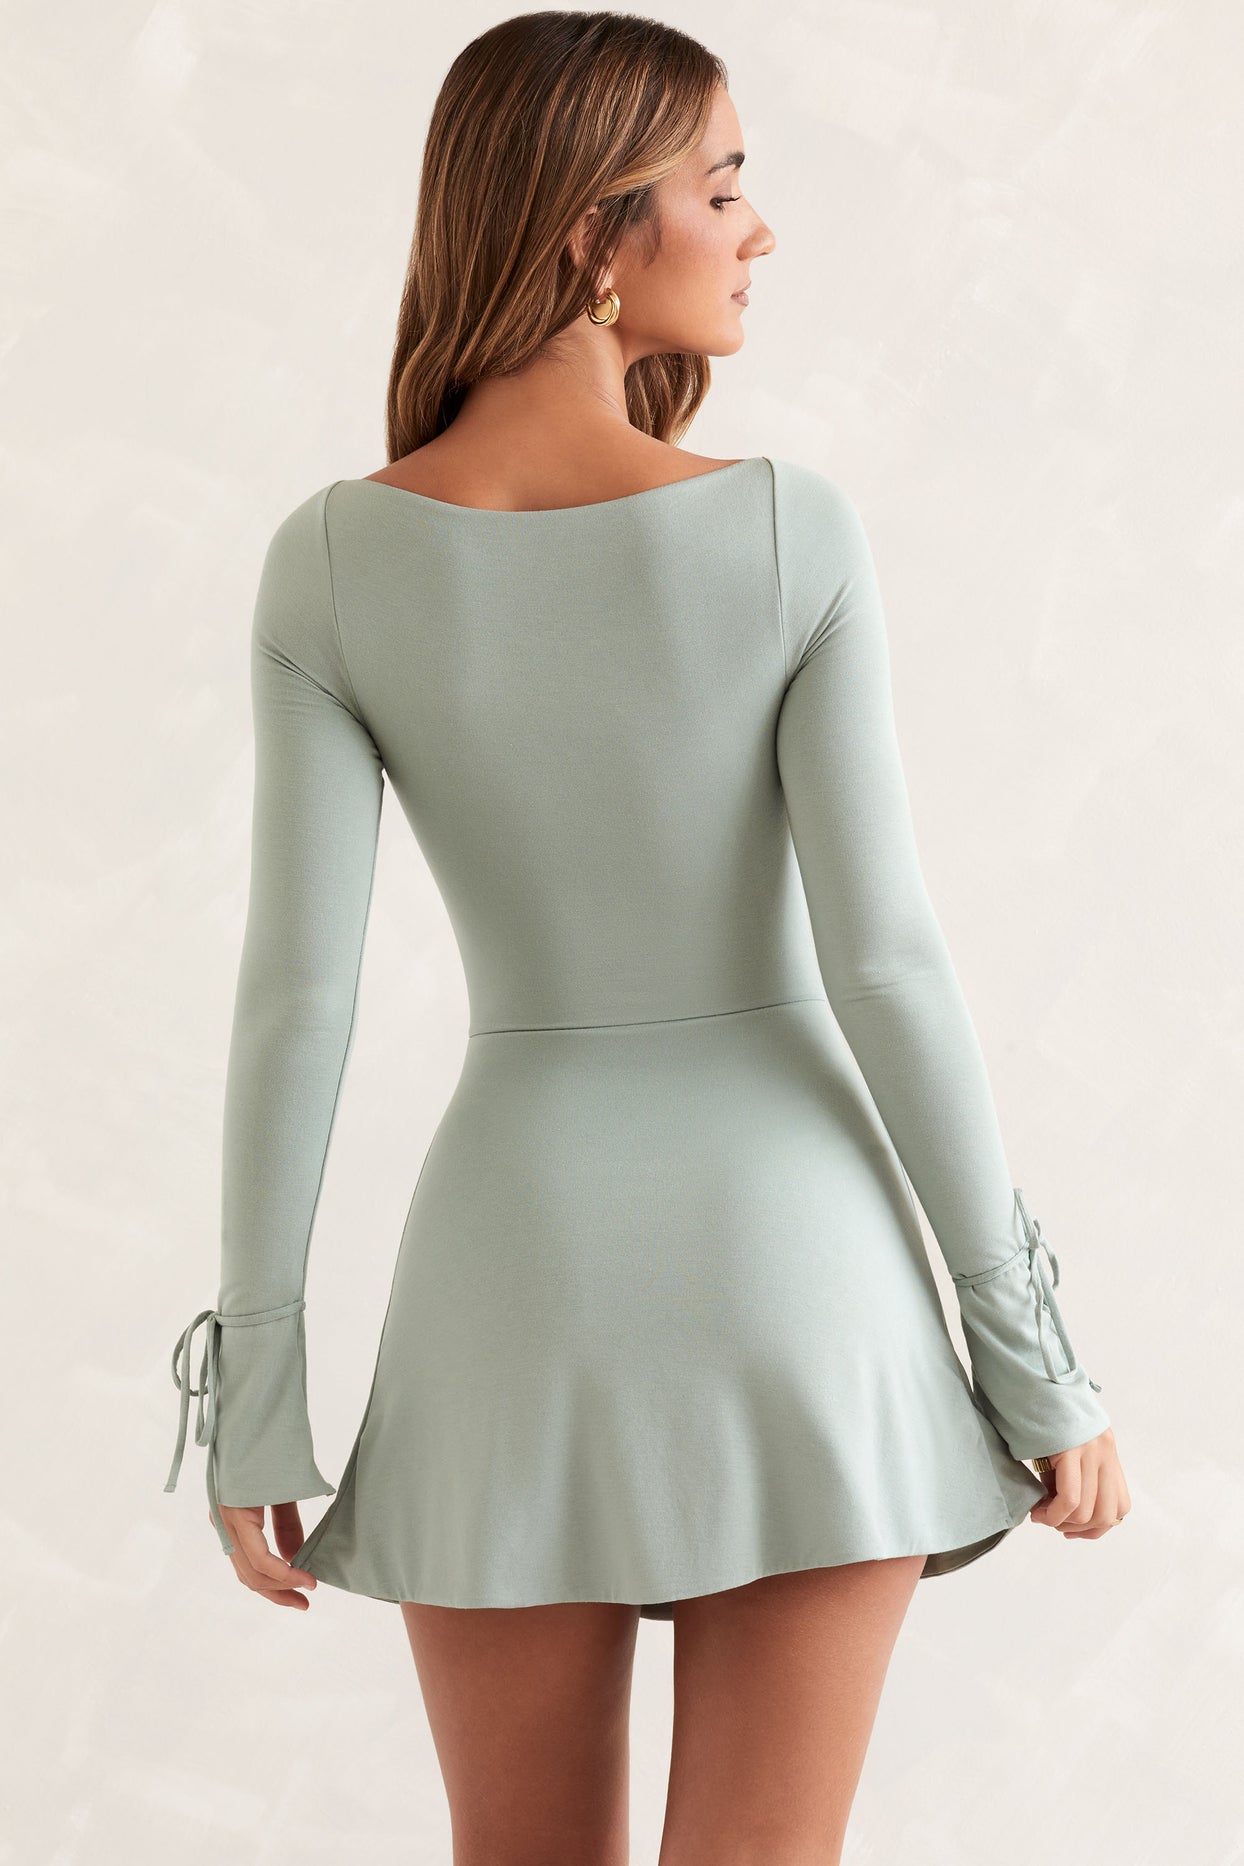 Baize Square Neck Long Sleeve Mini Dress in Ivory